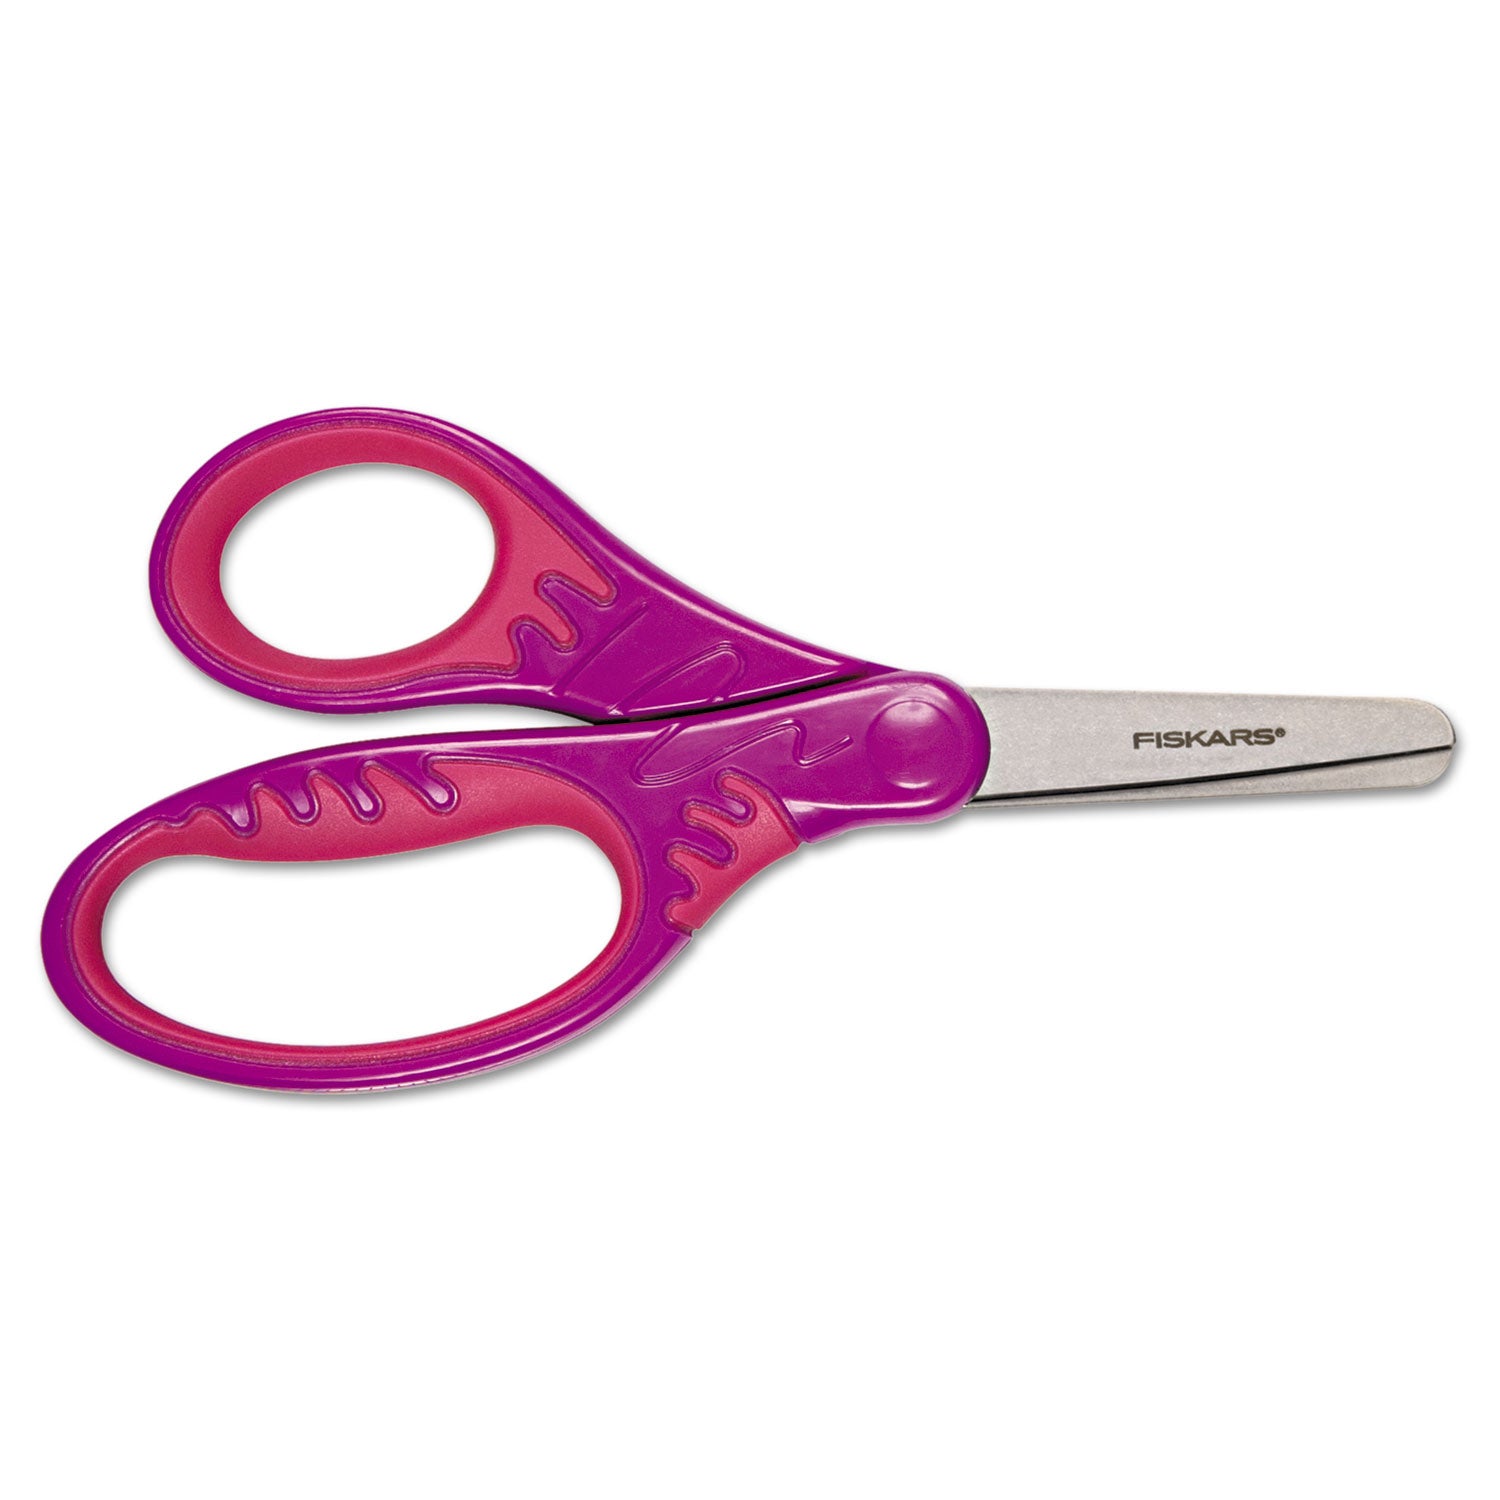 Kids/Student Softgrip Scissors, Rounded Tip, 5 Long, 1.75 Cut Length, Randomly Assorted Straight Handles - 